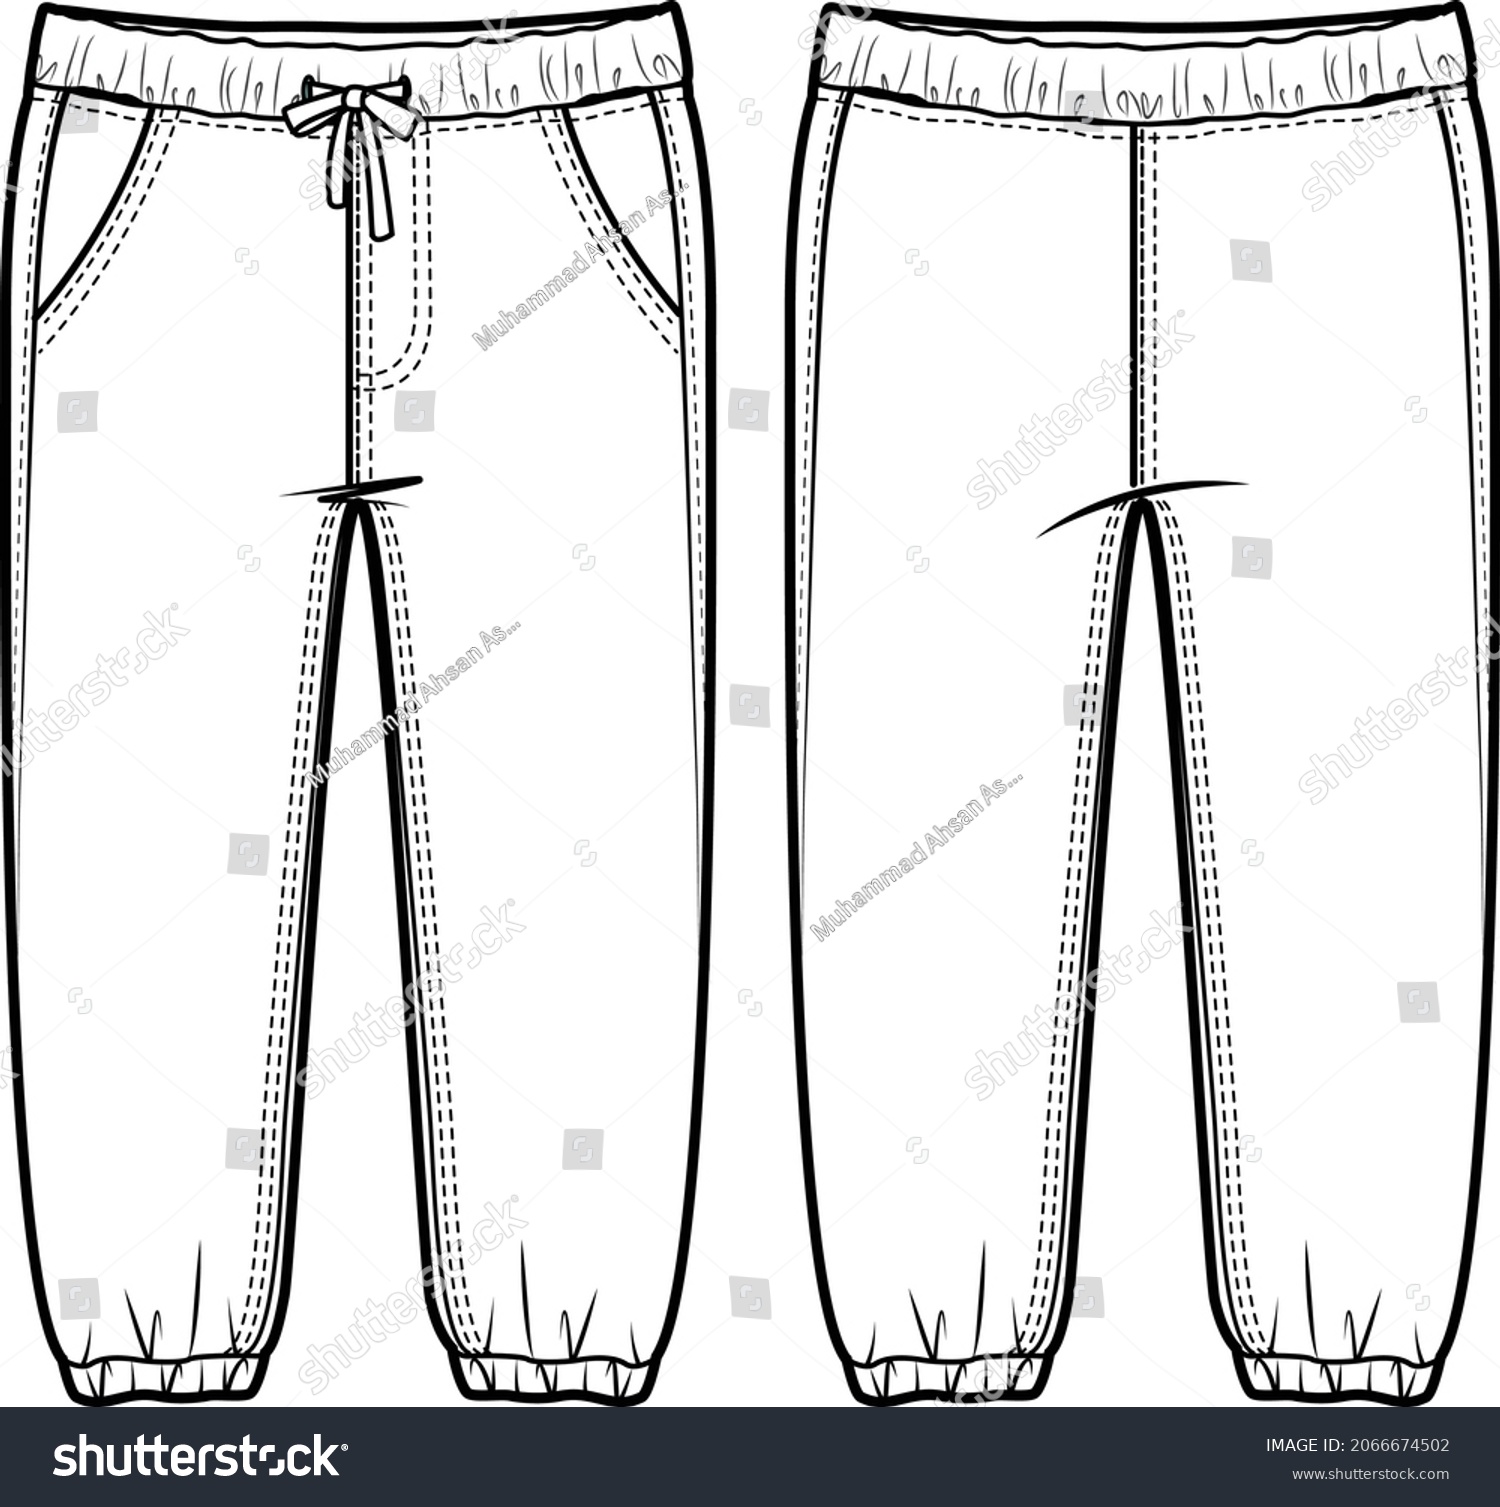 Girls Teens Woven Joggers Flat Sketch Stock Vector (Royalty Free ...